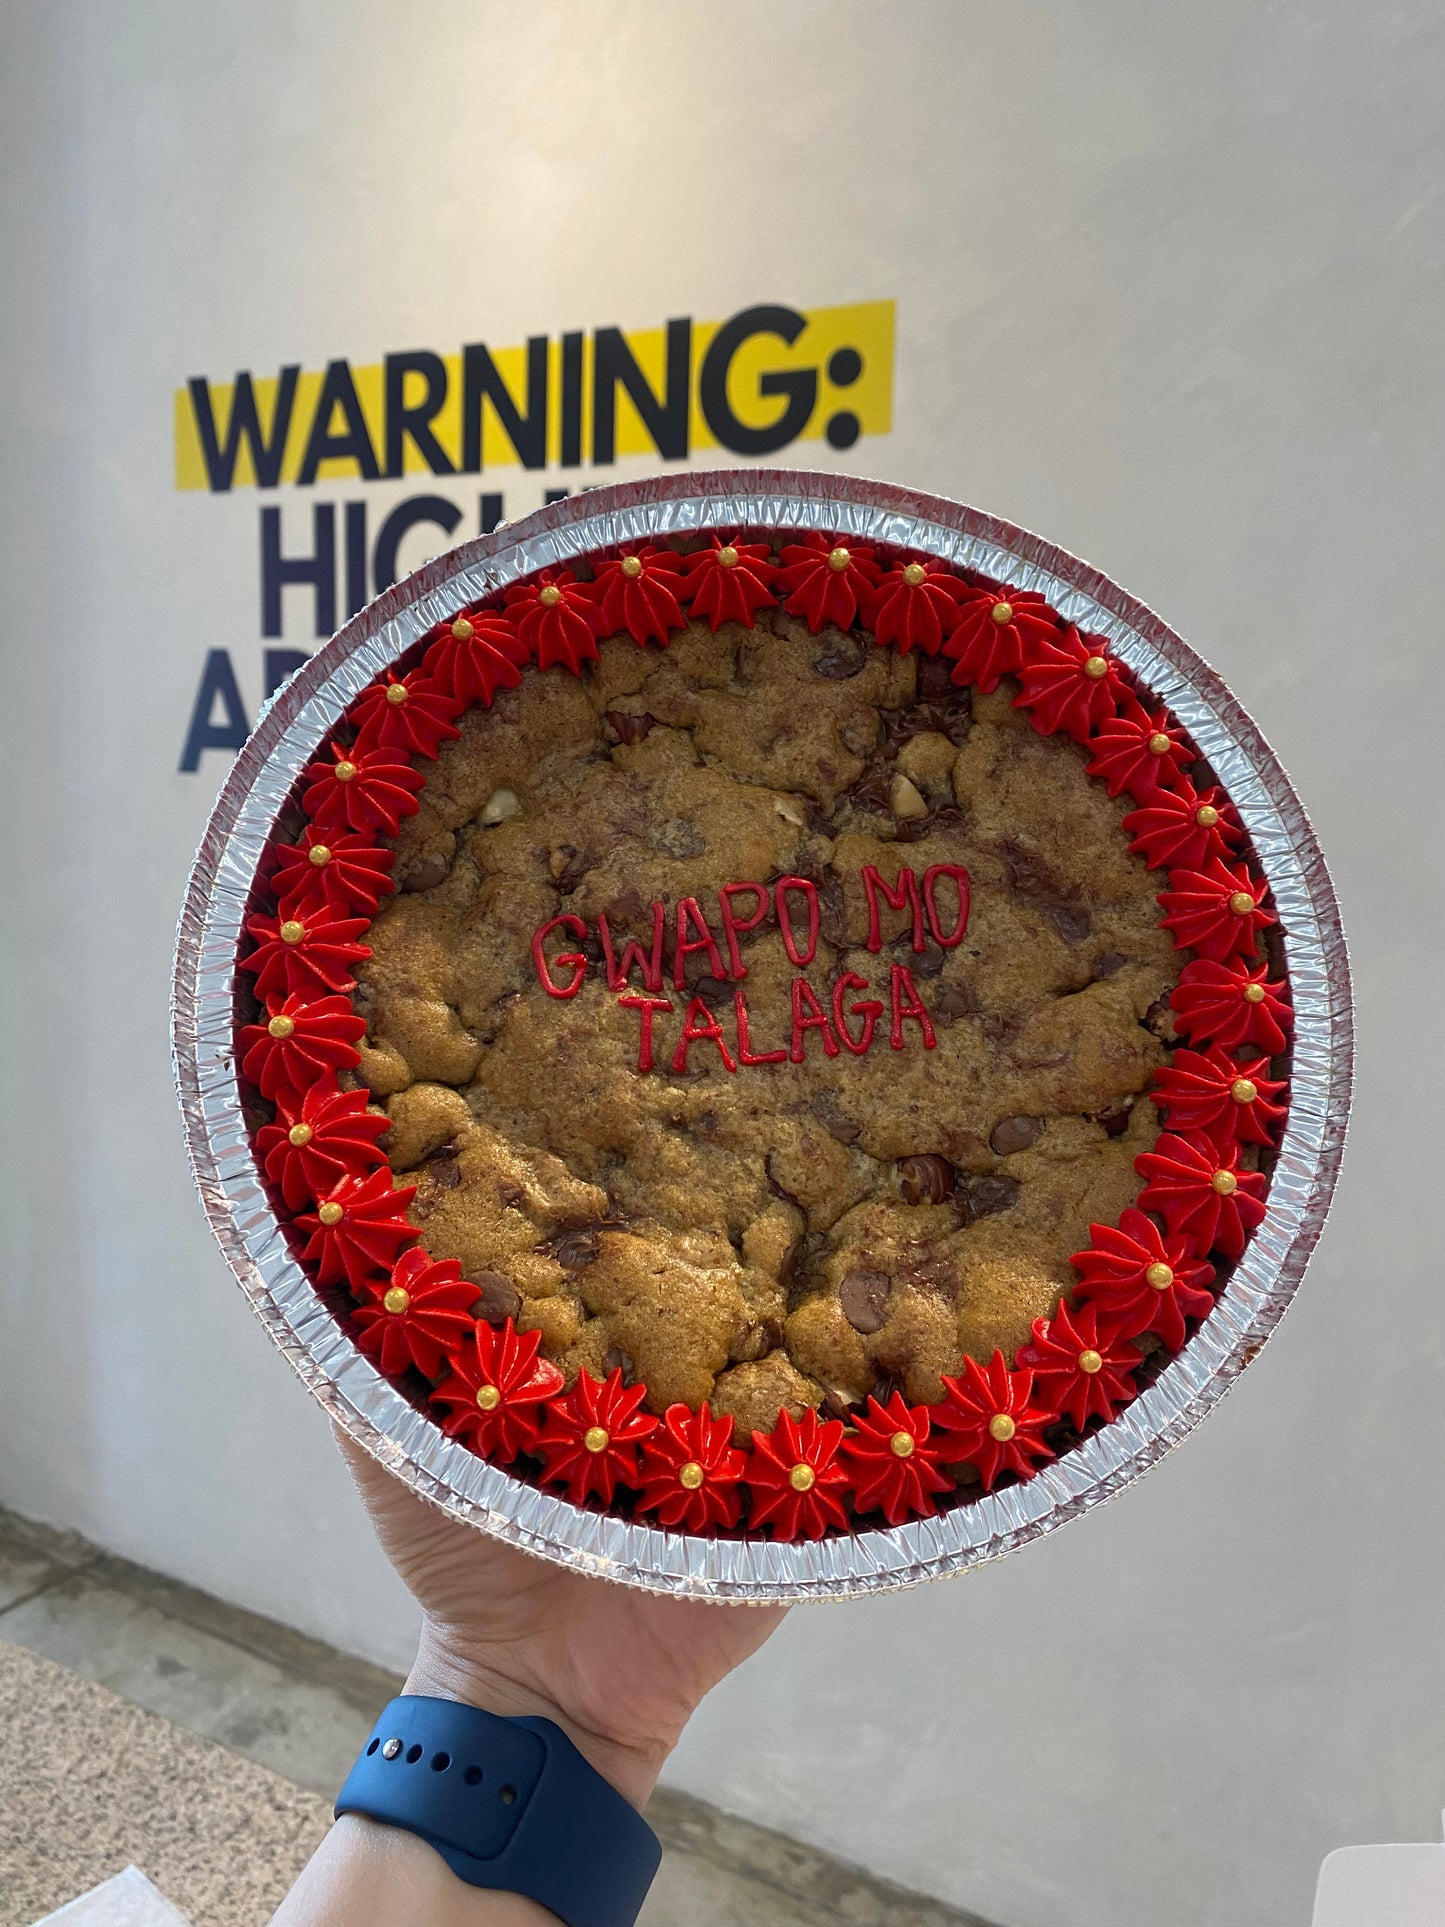 Giant Cookie Cakes (6 Flavors)